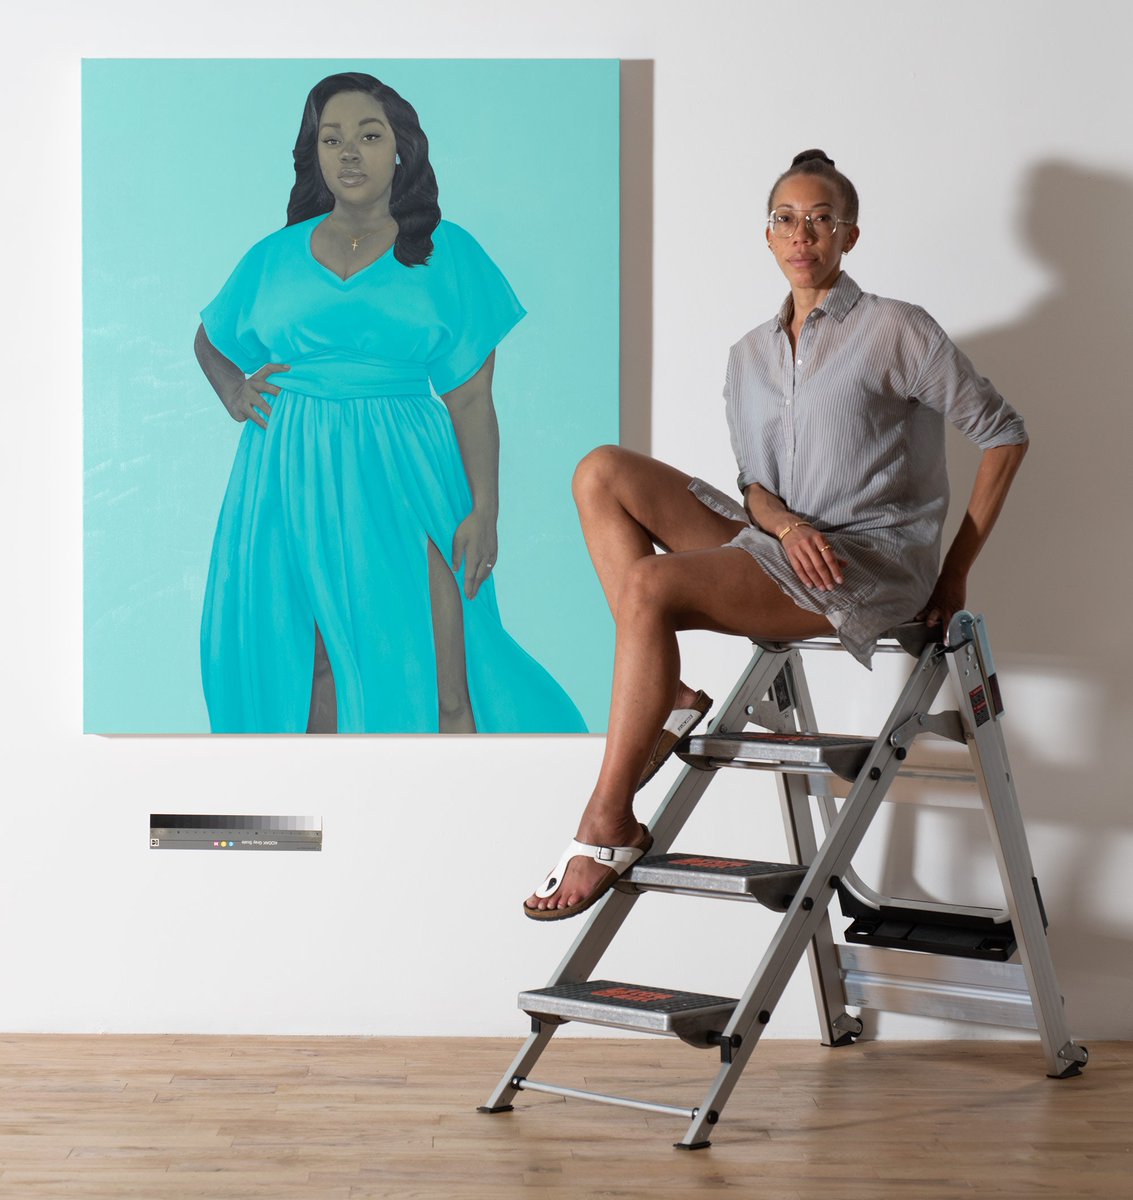 Painter Amy Sherald on making Breonna Taylor's portrait: "Producing this image keeps Breonna alive forever." http://vntyfr.com/wGGXeru 